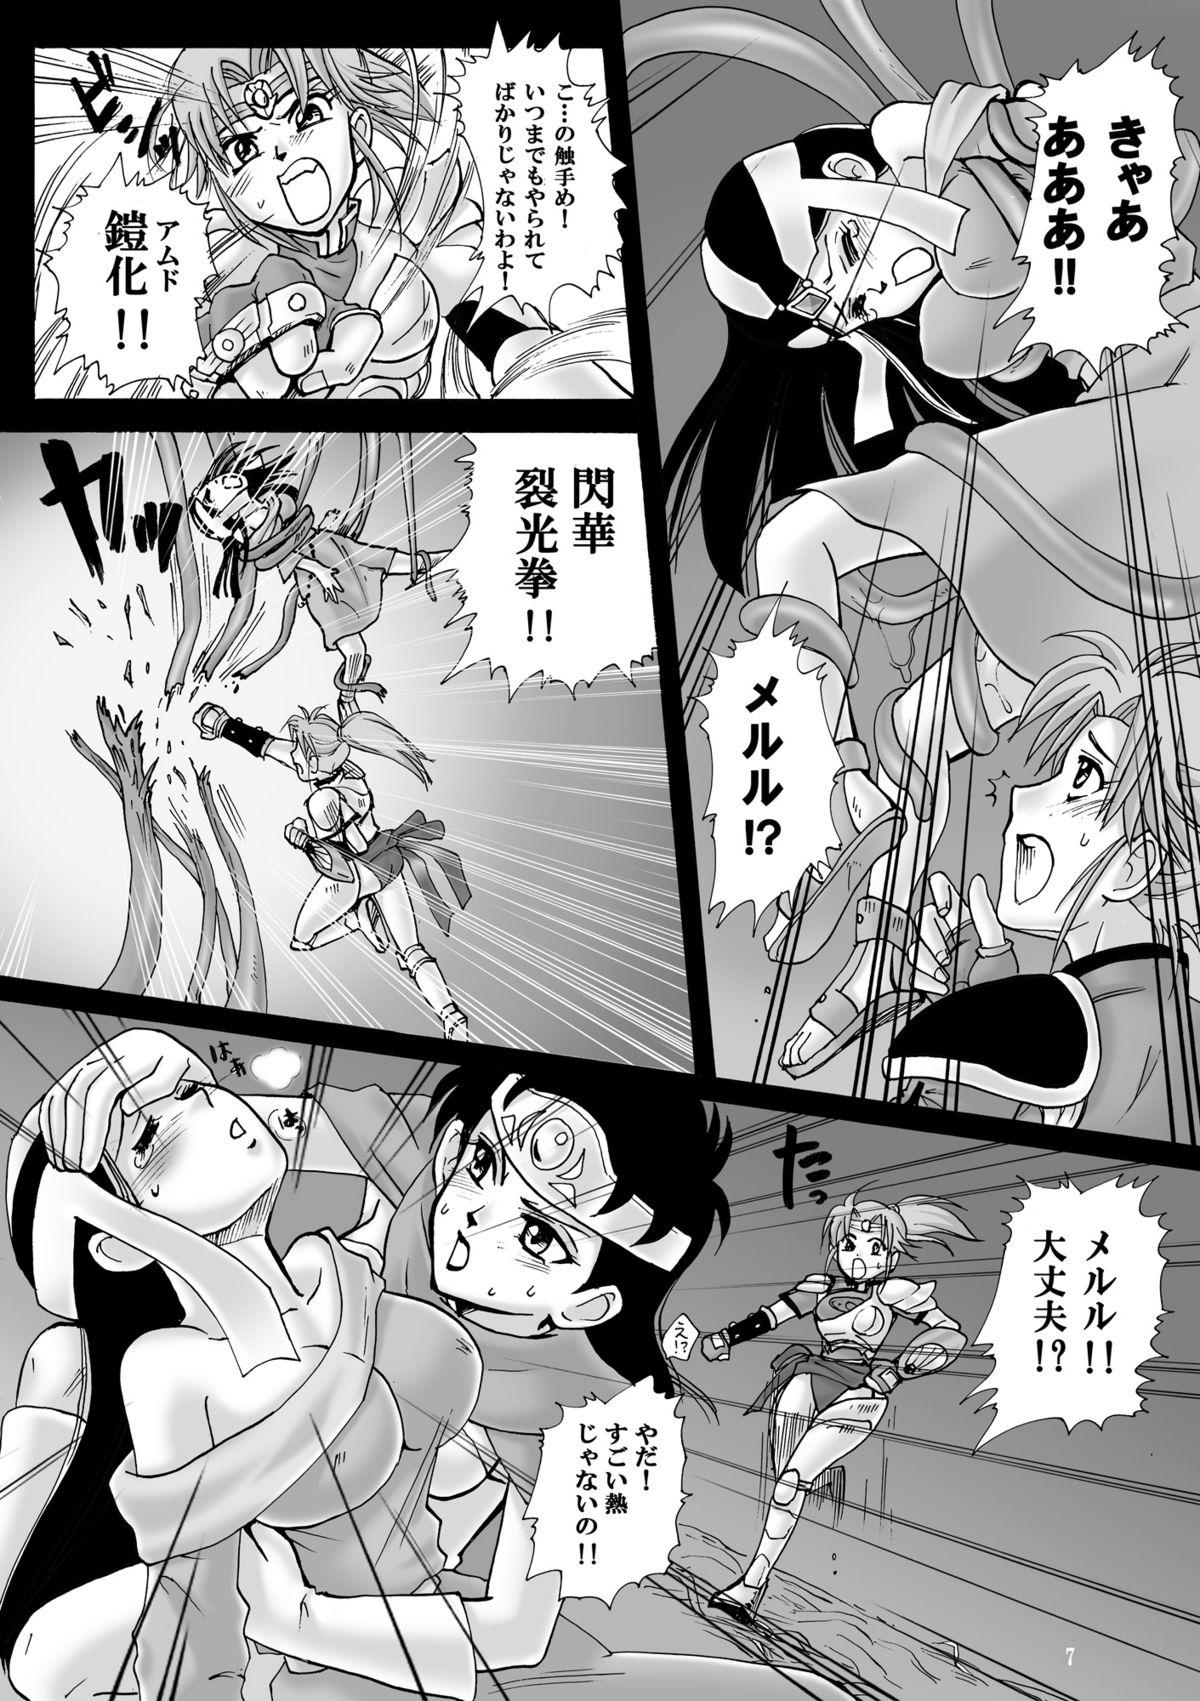 Sex Party Mataikiden Maam 2 - Dragon quest dai no daibouken Culote - Page 6